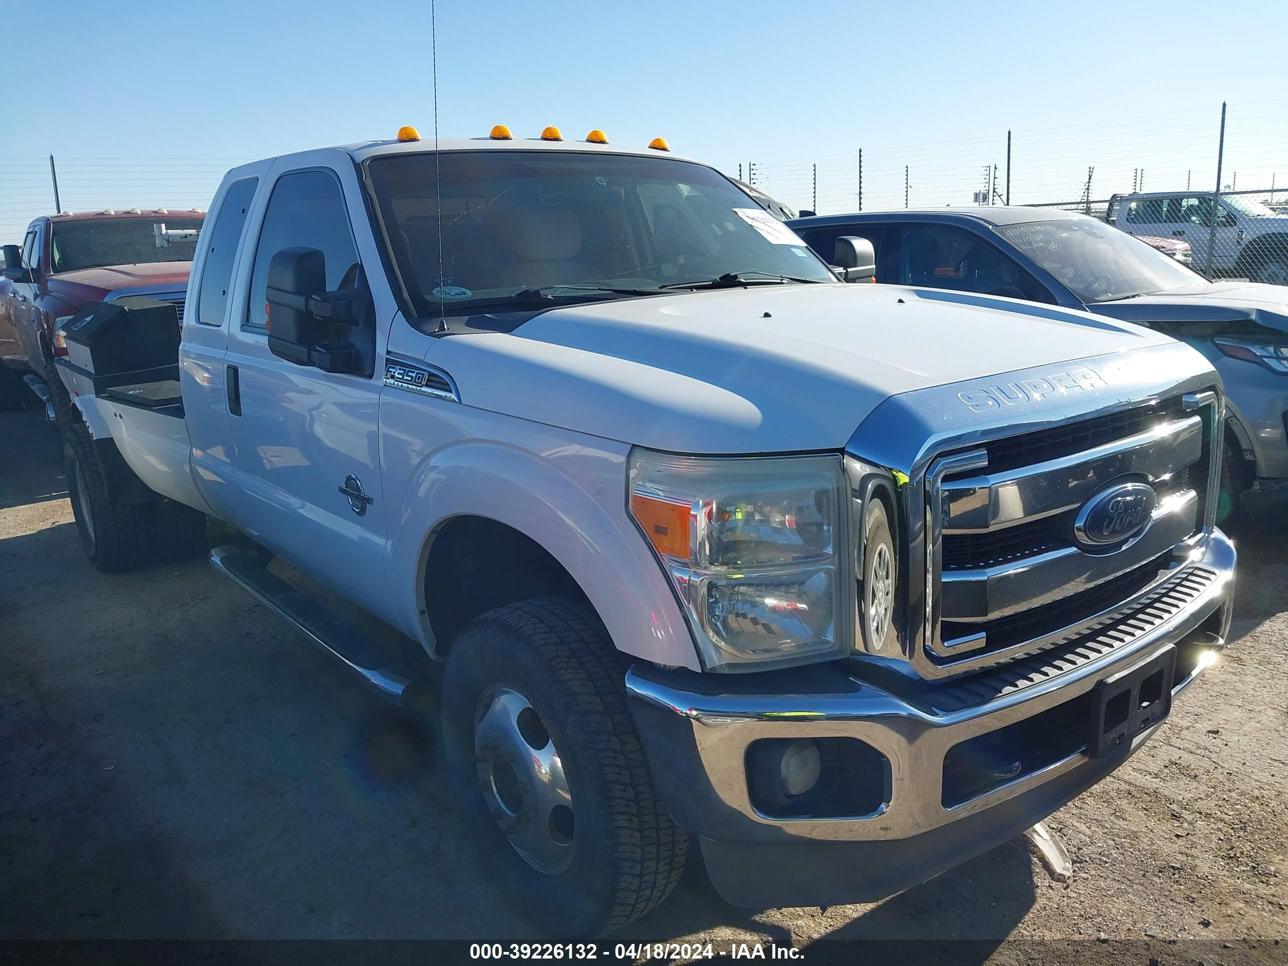 VIN: 1FT8X3DT3CED22417 - ford f350